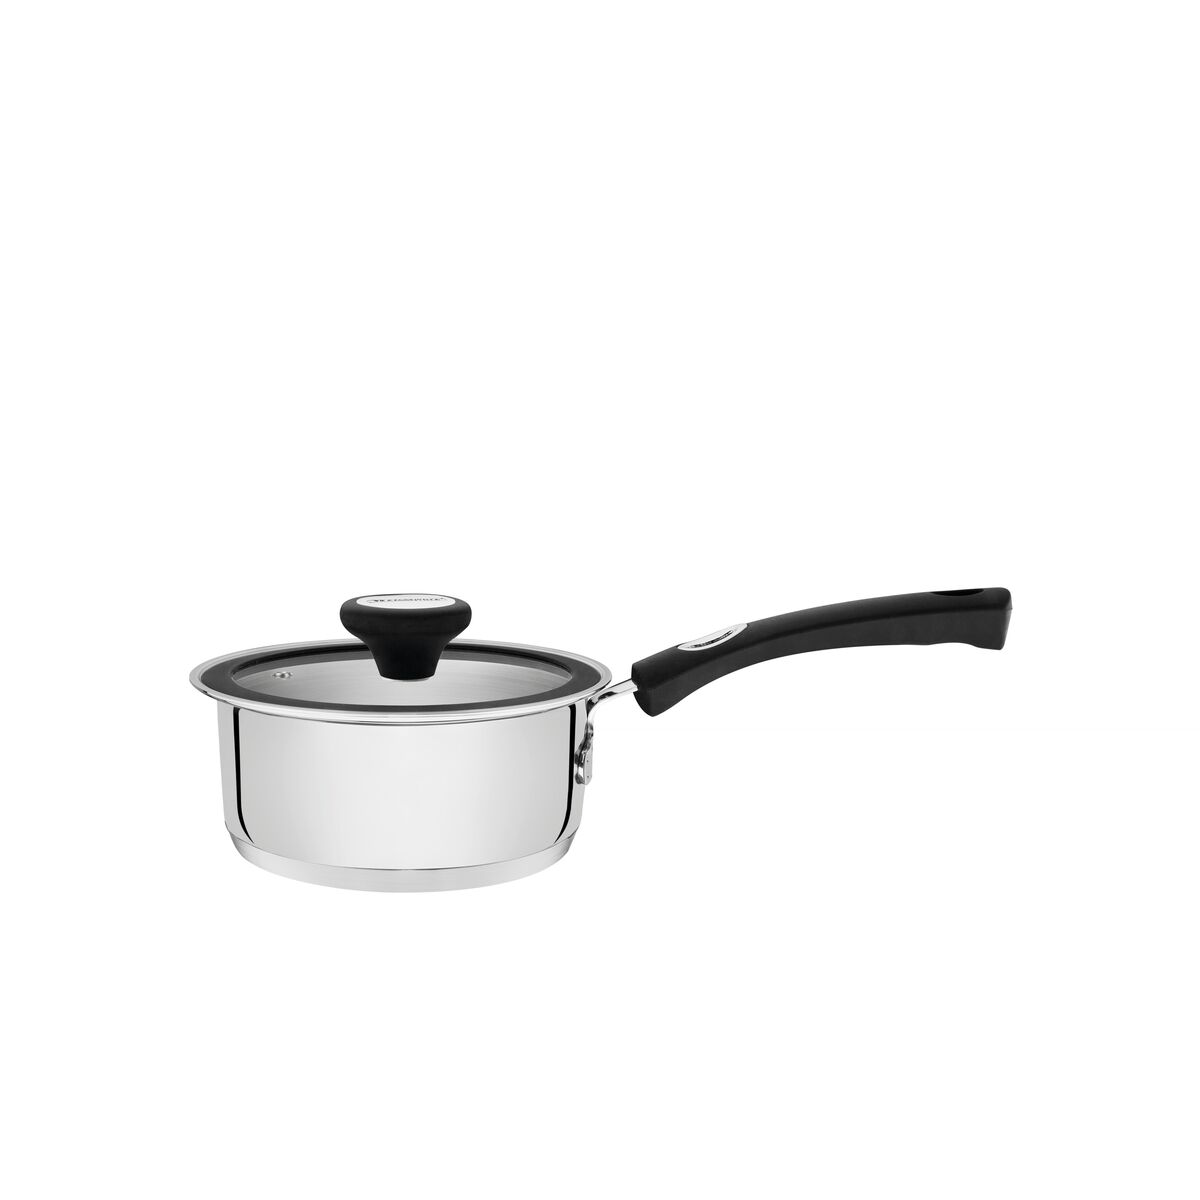 Tramontina Solar Silicone stainless steel saucepan with tri-ply base, 16 cm 1.4 L